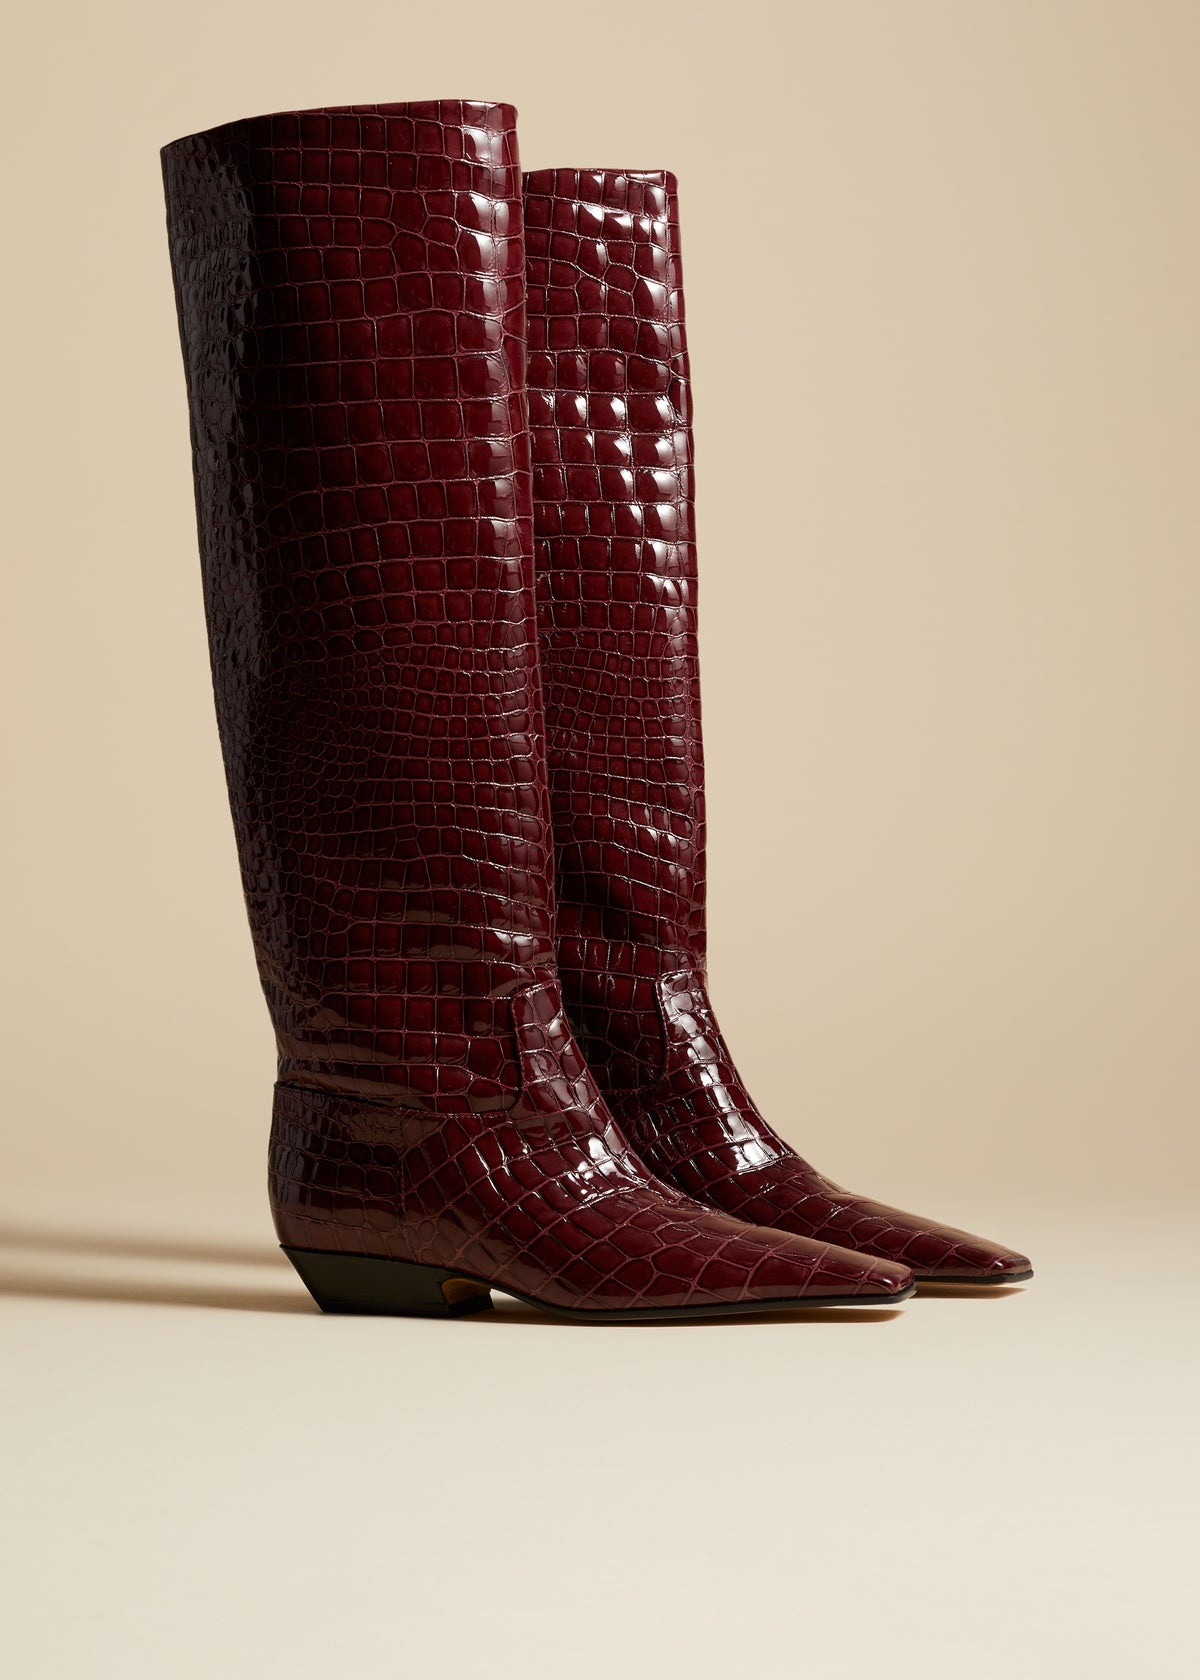 The Marfa Knee-High Boot in Bordeaux Croc-Embossed Leather - 2